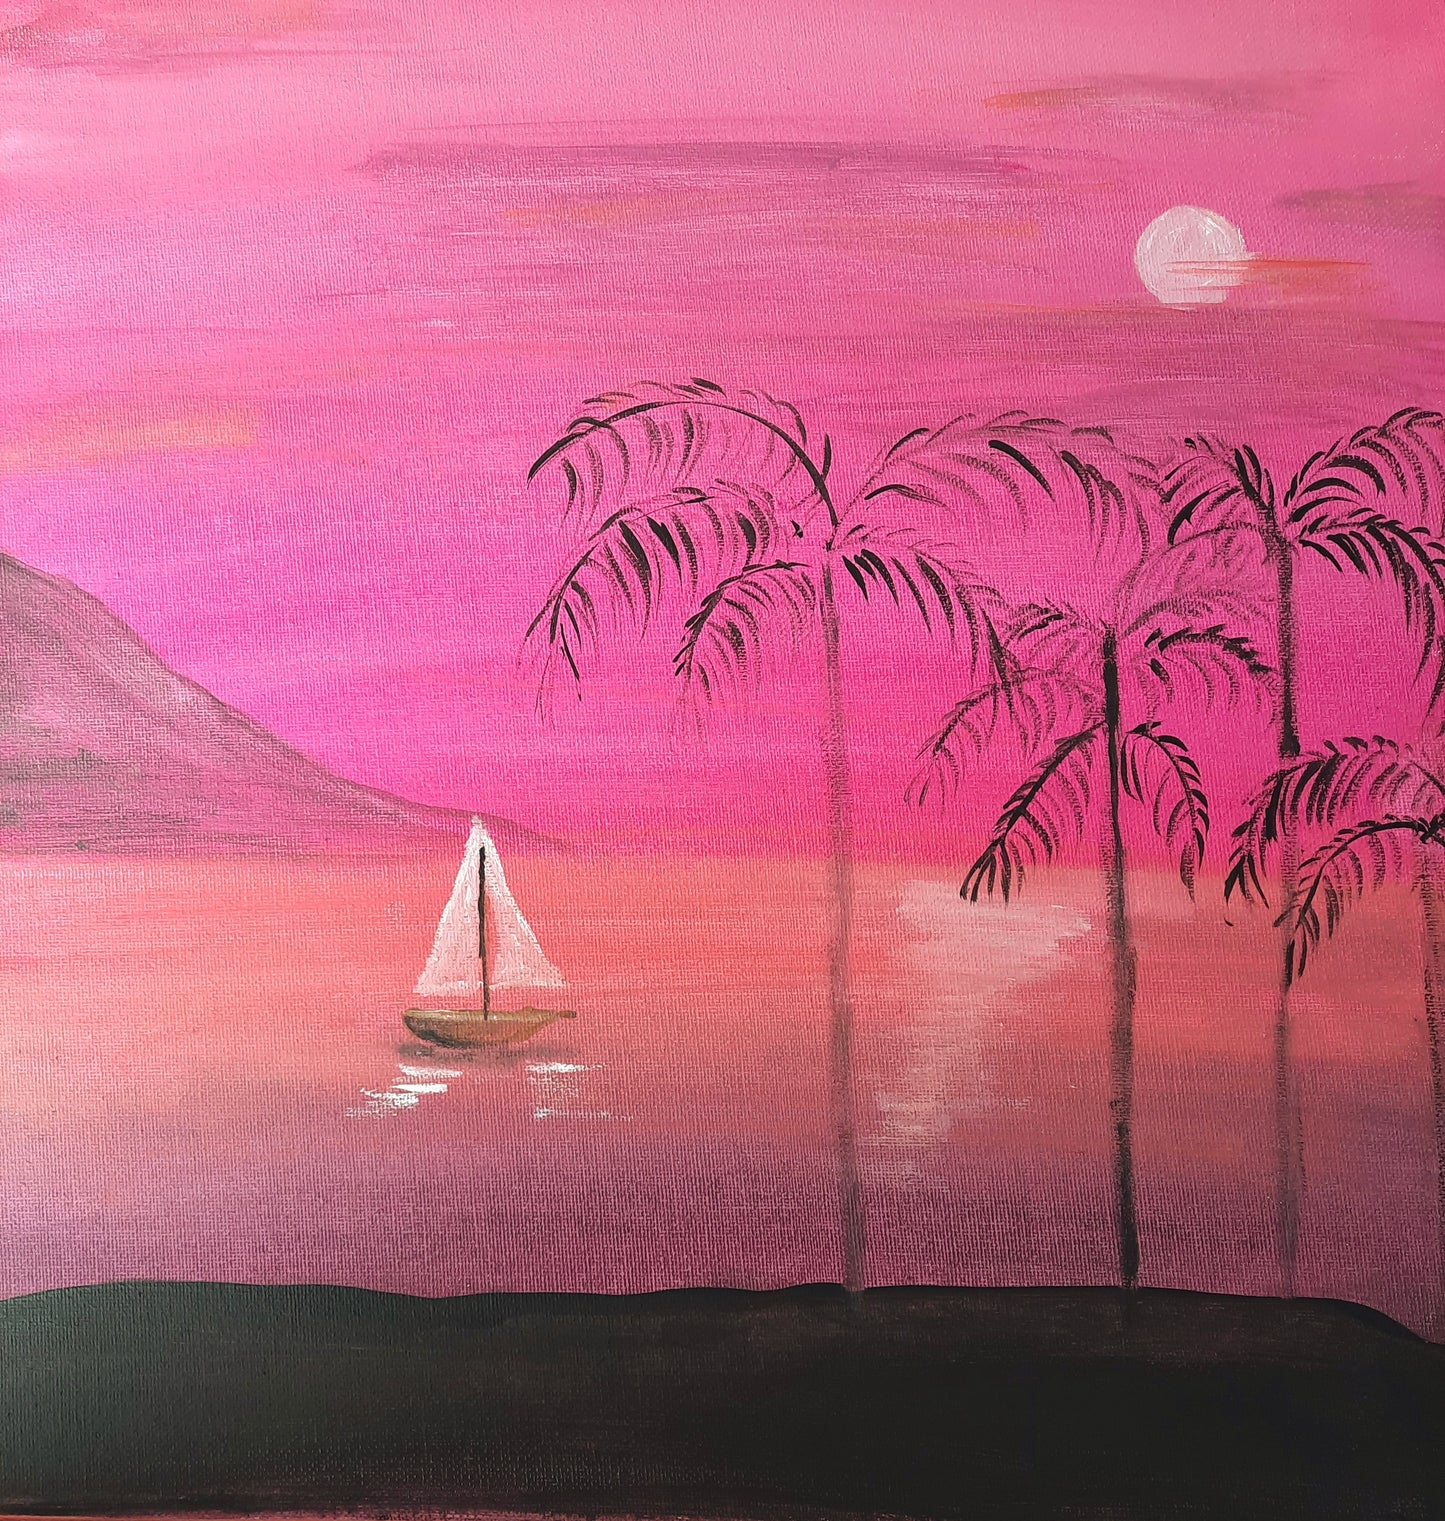 Pink Sunset - Sunday SESH ONLY $45.00 3rd MAR 1-3pm